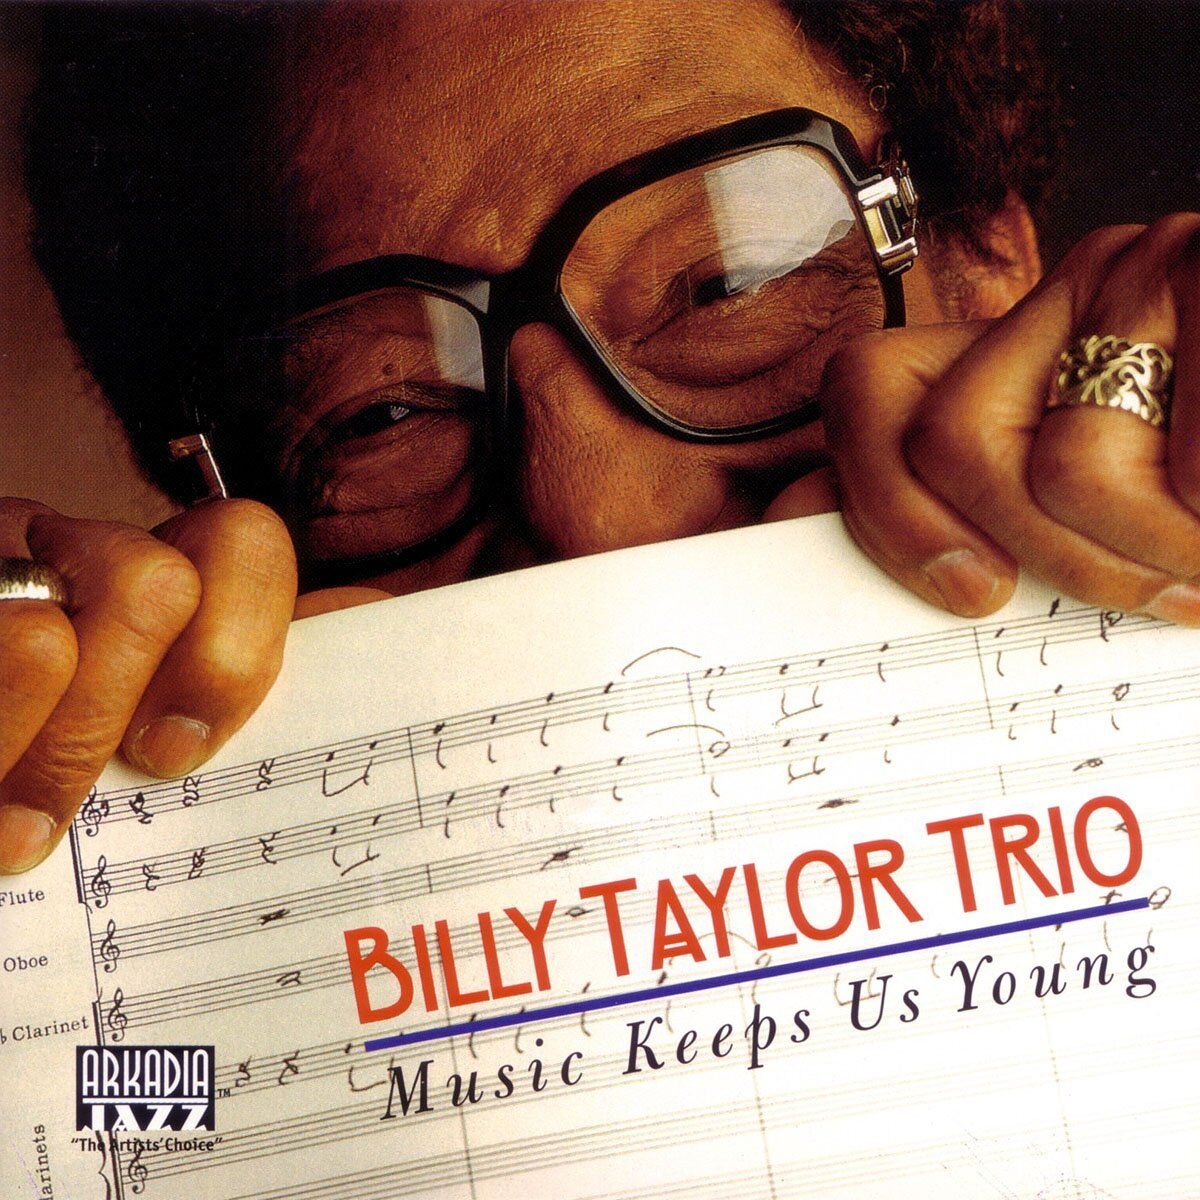 BILLY TAYLOR: Music Keeps Us Young - Arkadia Records